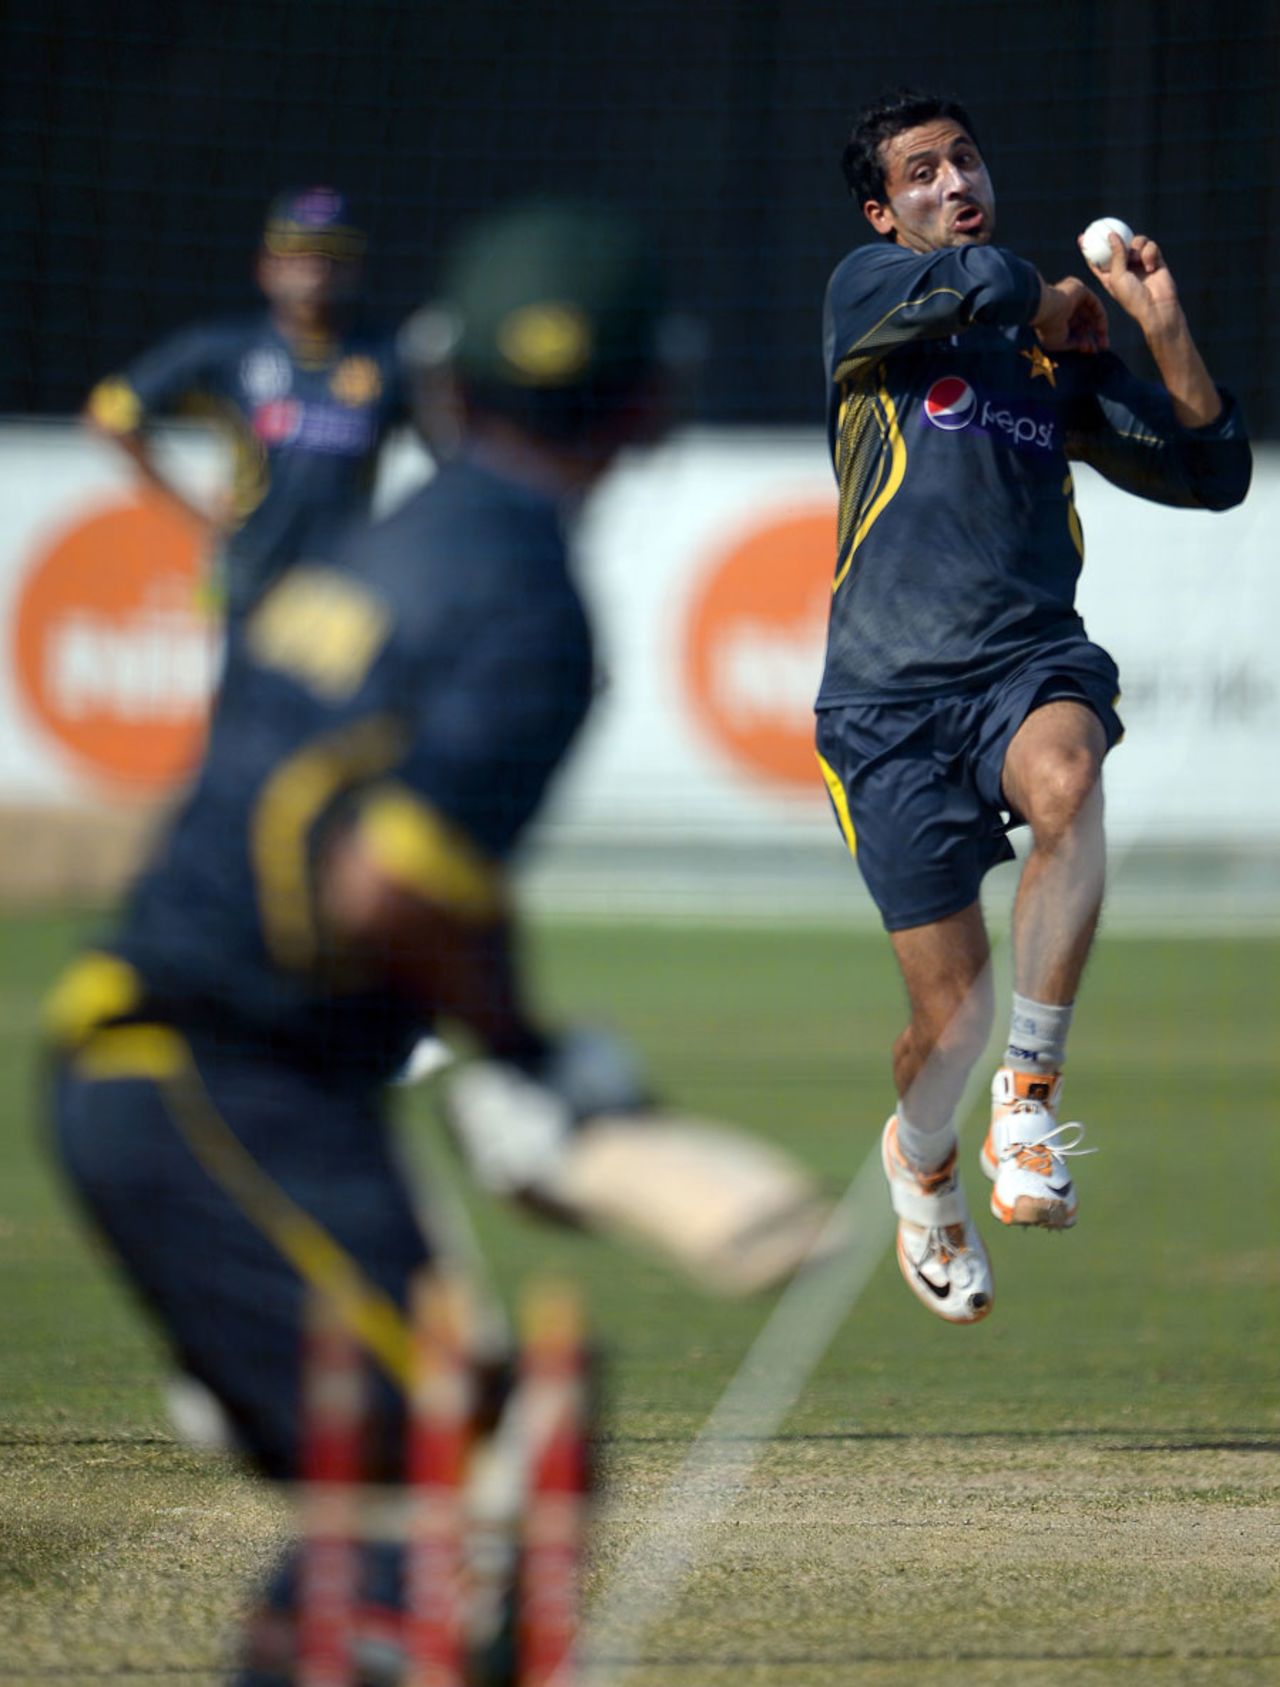 Junaid Khan runs in to bowl during a practice session on the eve of the second ODI, Dubai, October 31, 2013